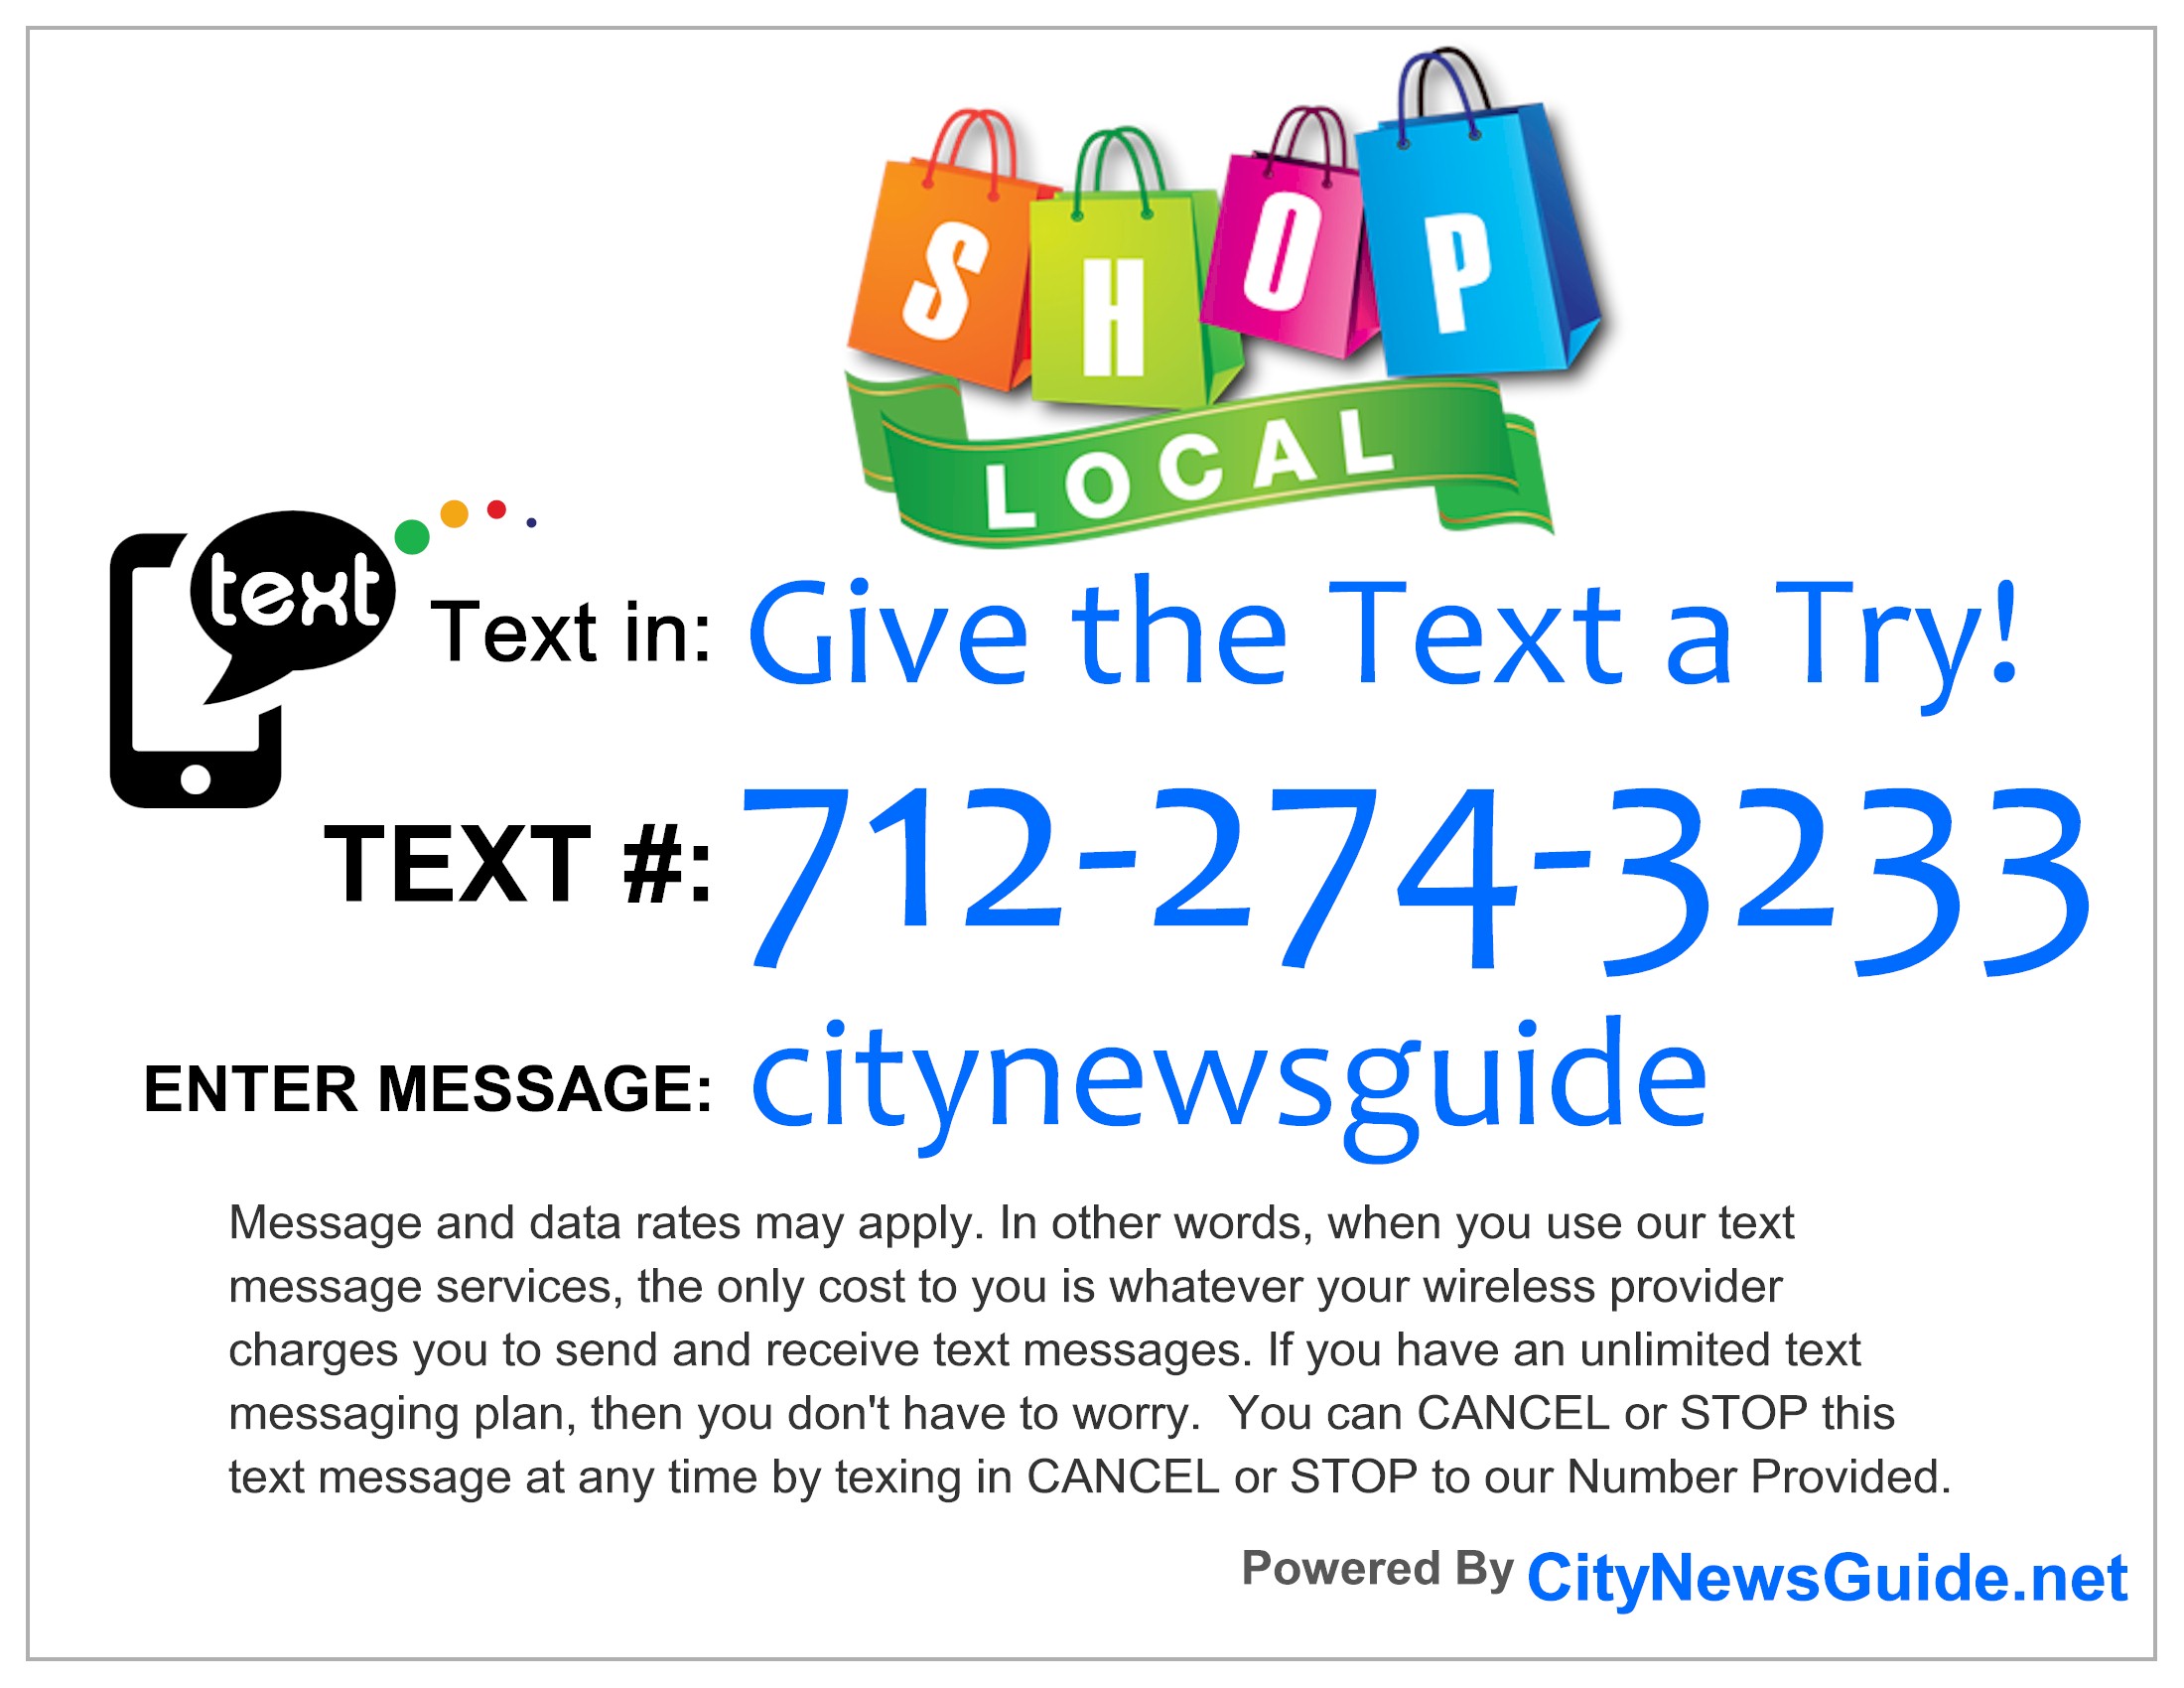 Proudly Display - Shop Local - Text Marketing - CityNewsGuide.net